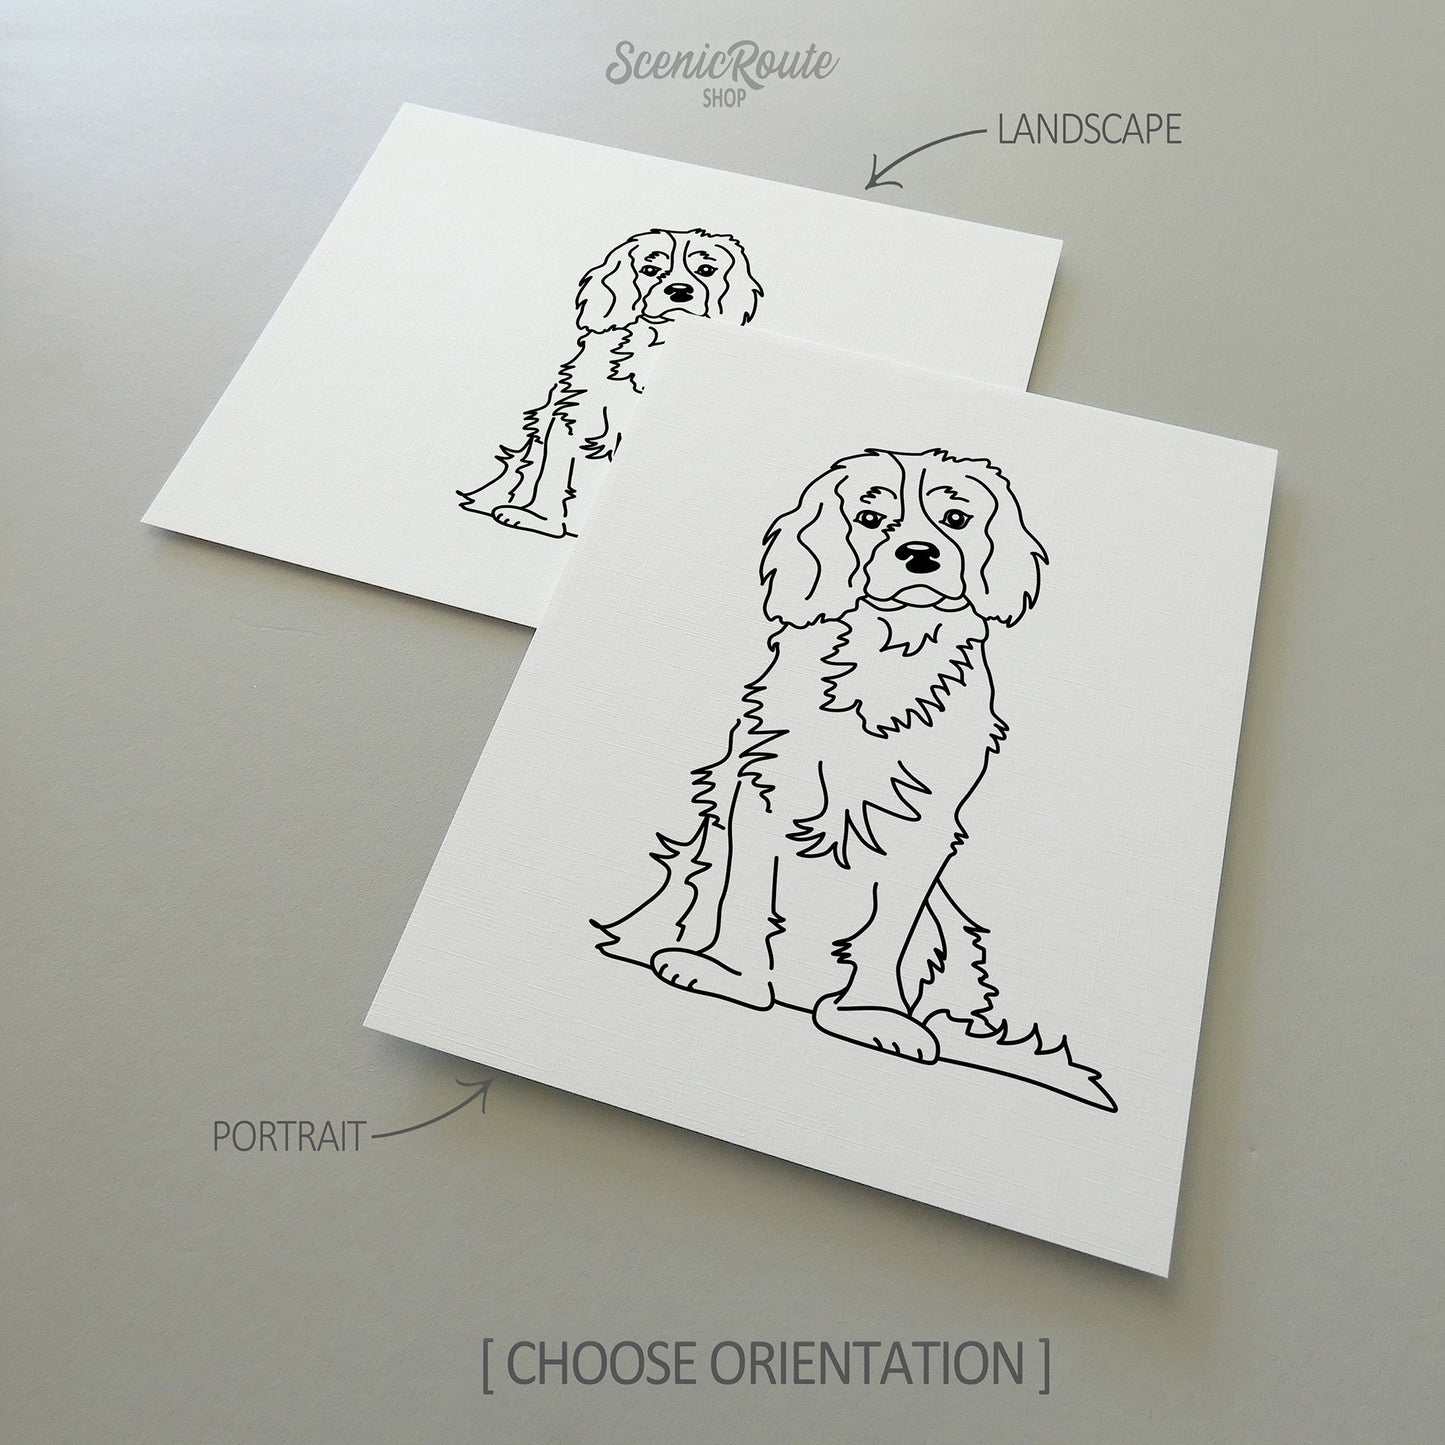 Two drawings of a Cavalier King Charles Spaniel dog on white linen paper with a gray background.  Pieces are shown in portrait and landscape orientation options to illustrate the available art print options.